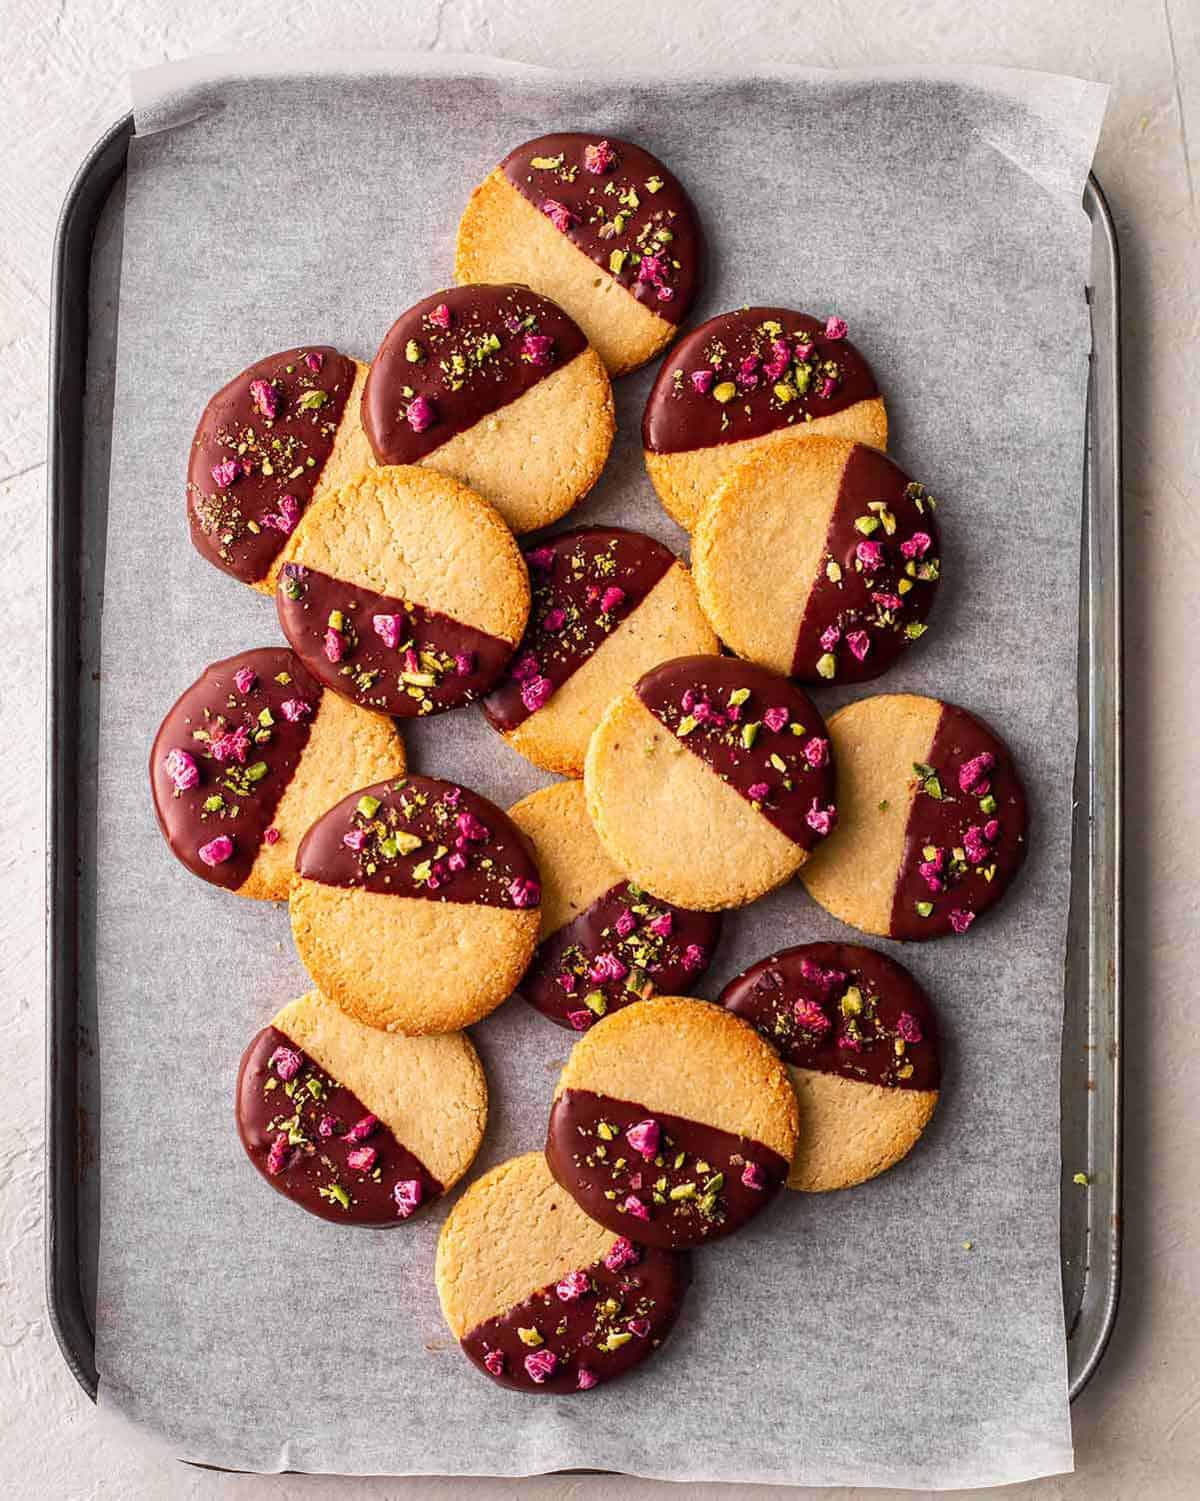 An overhead view of Vegan Almond Flour Shortbread Cookies dipped in chocolate, topped with pistachios and freeze-dried raspberries, placed in a baking tray.